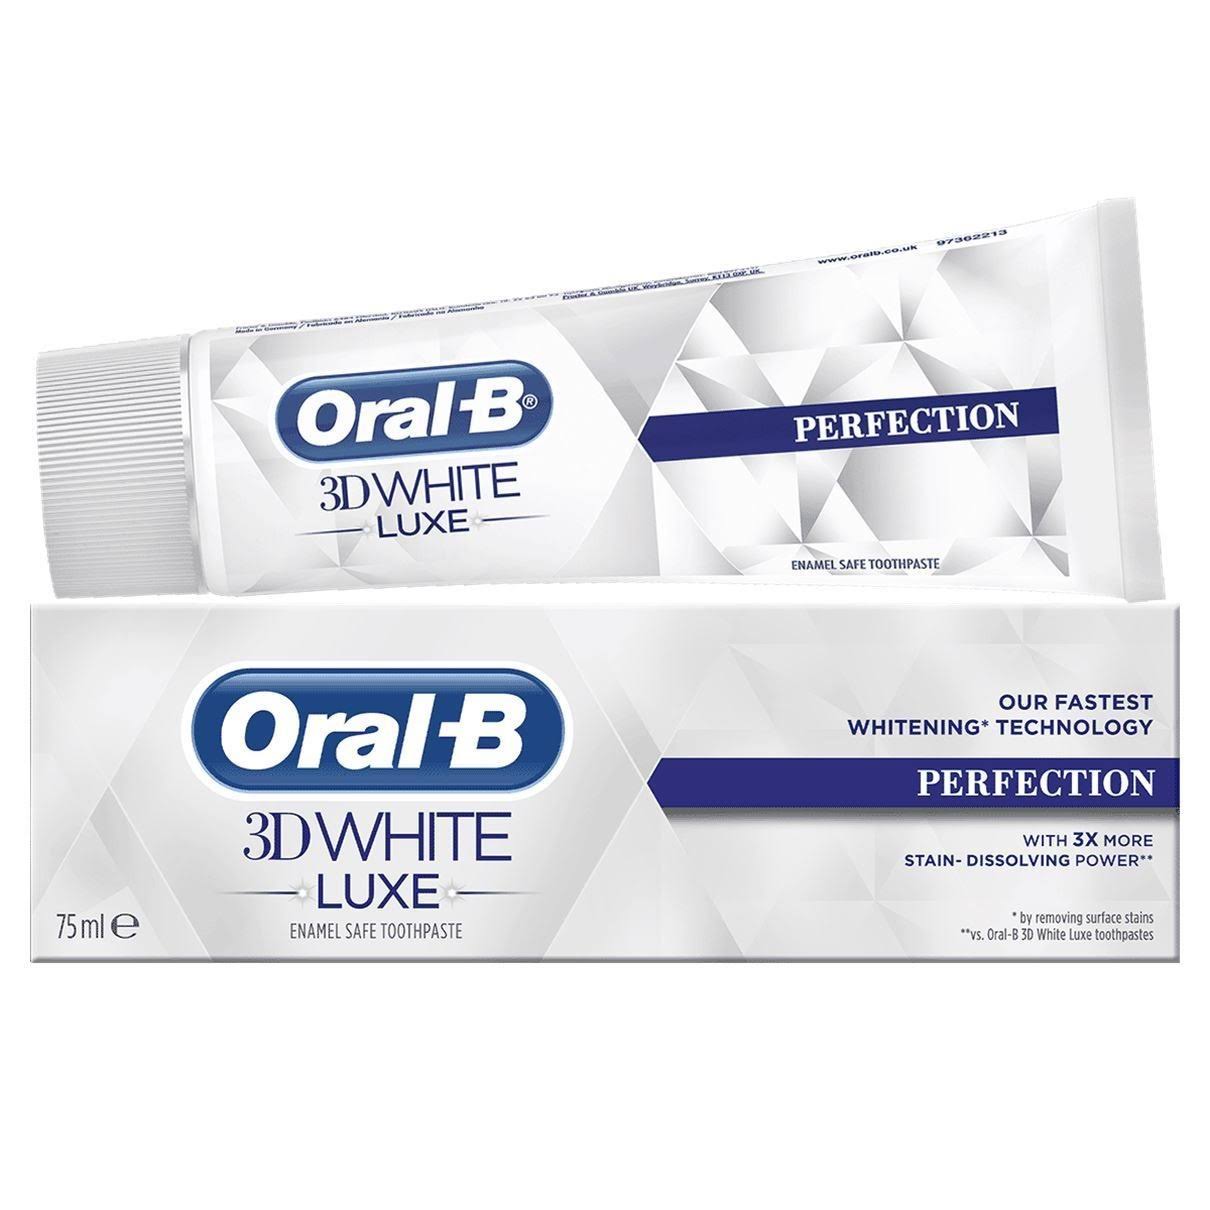 Oral B 3D White Luxe Perfection Whitening Toothpaste - 75ml